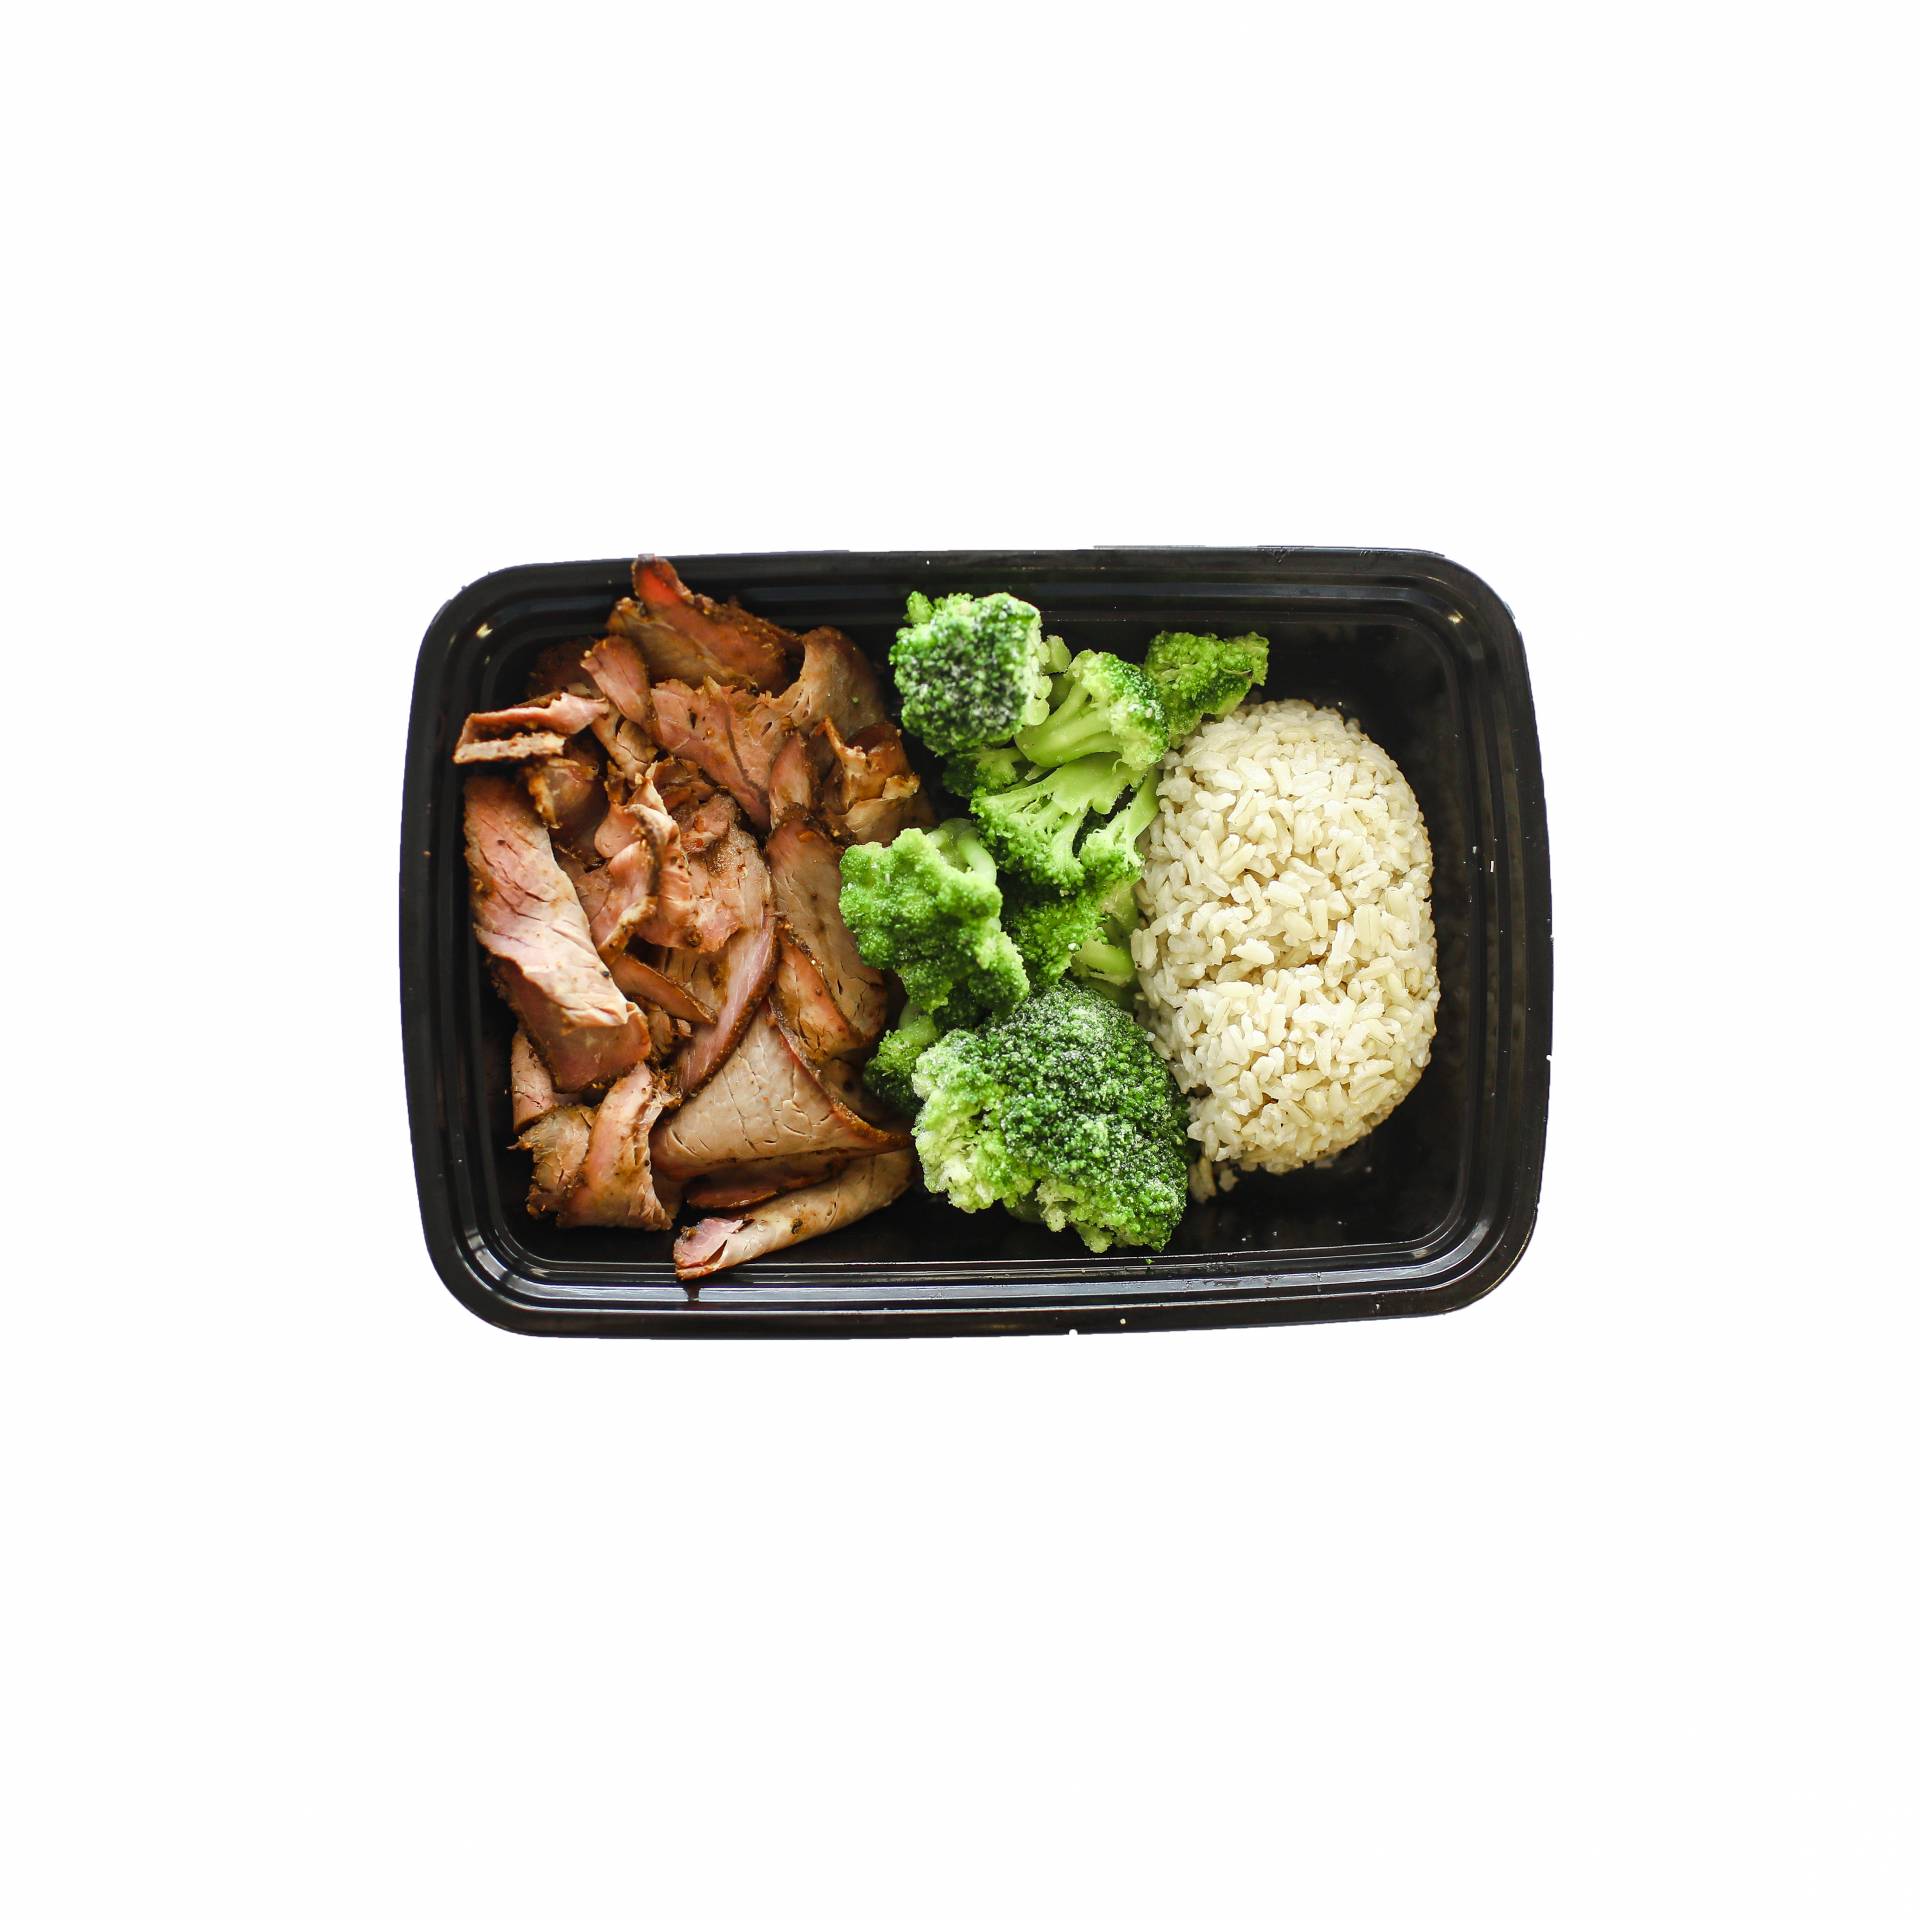 Smoked Tri-Tip with Brown Rice & Broccoli